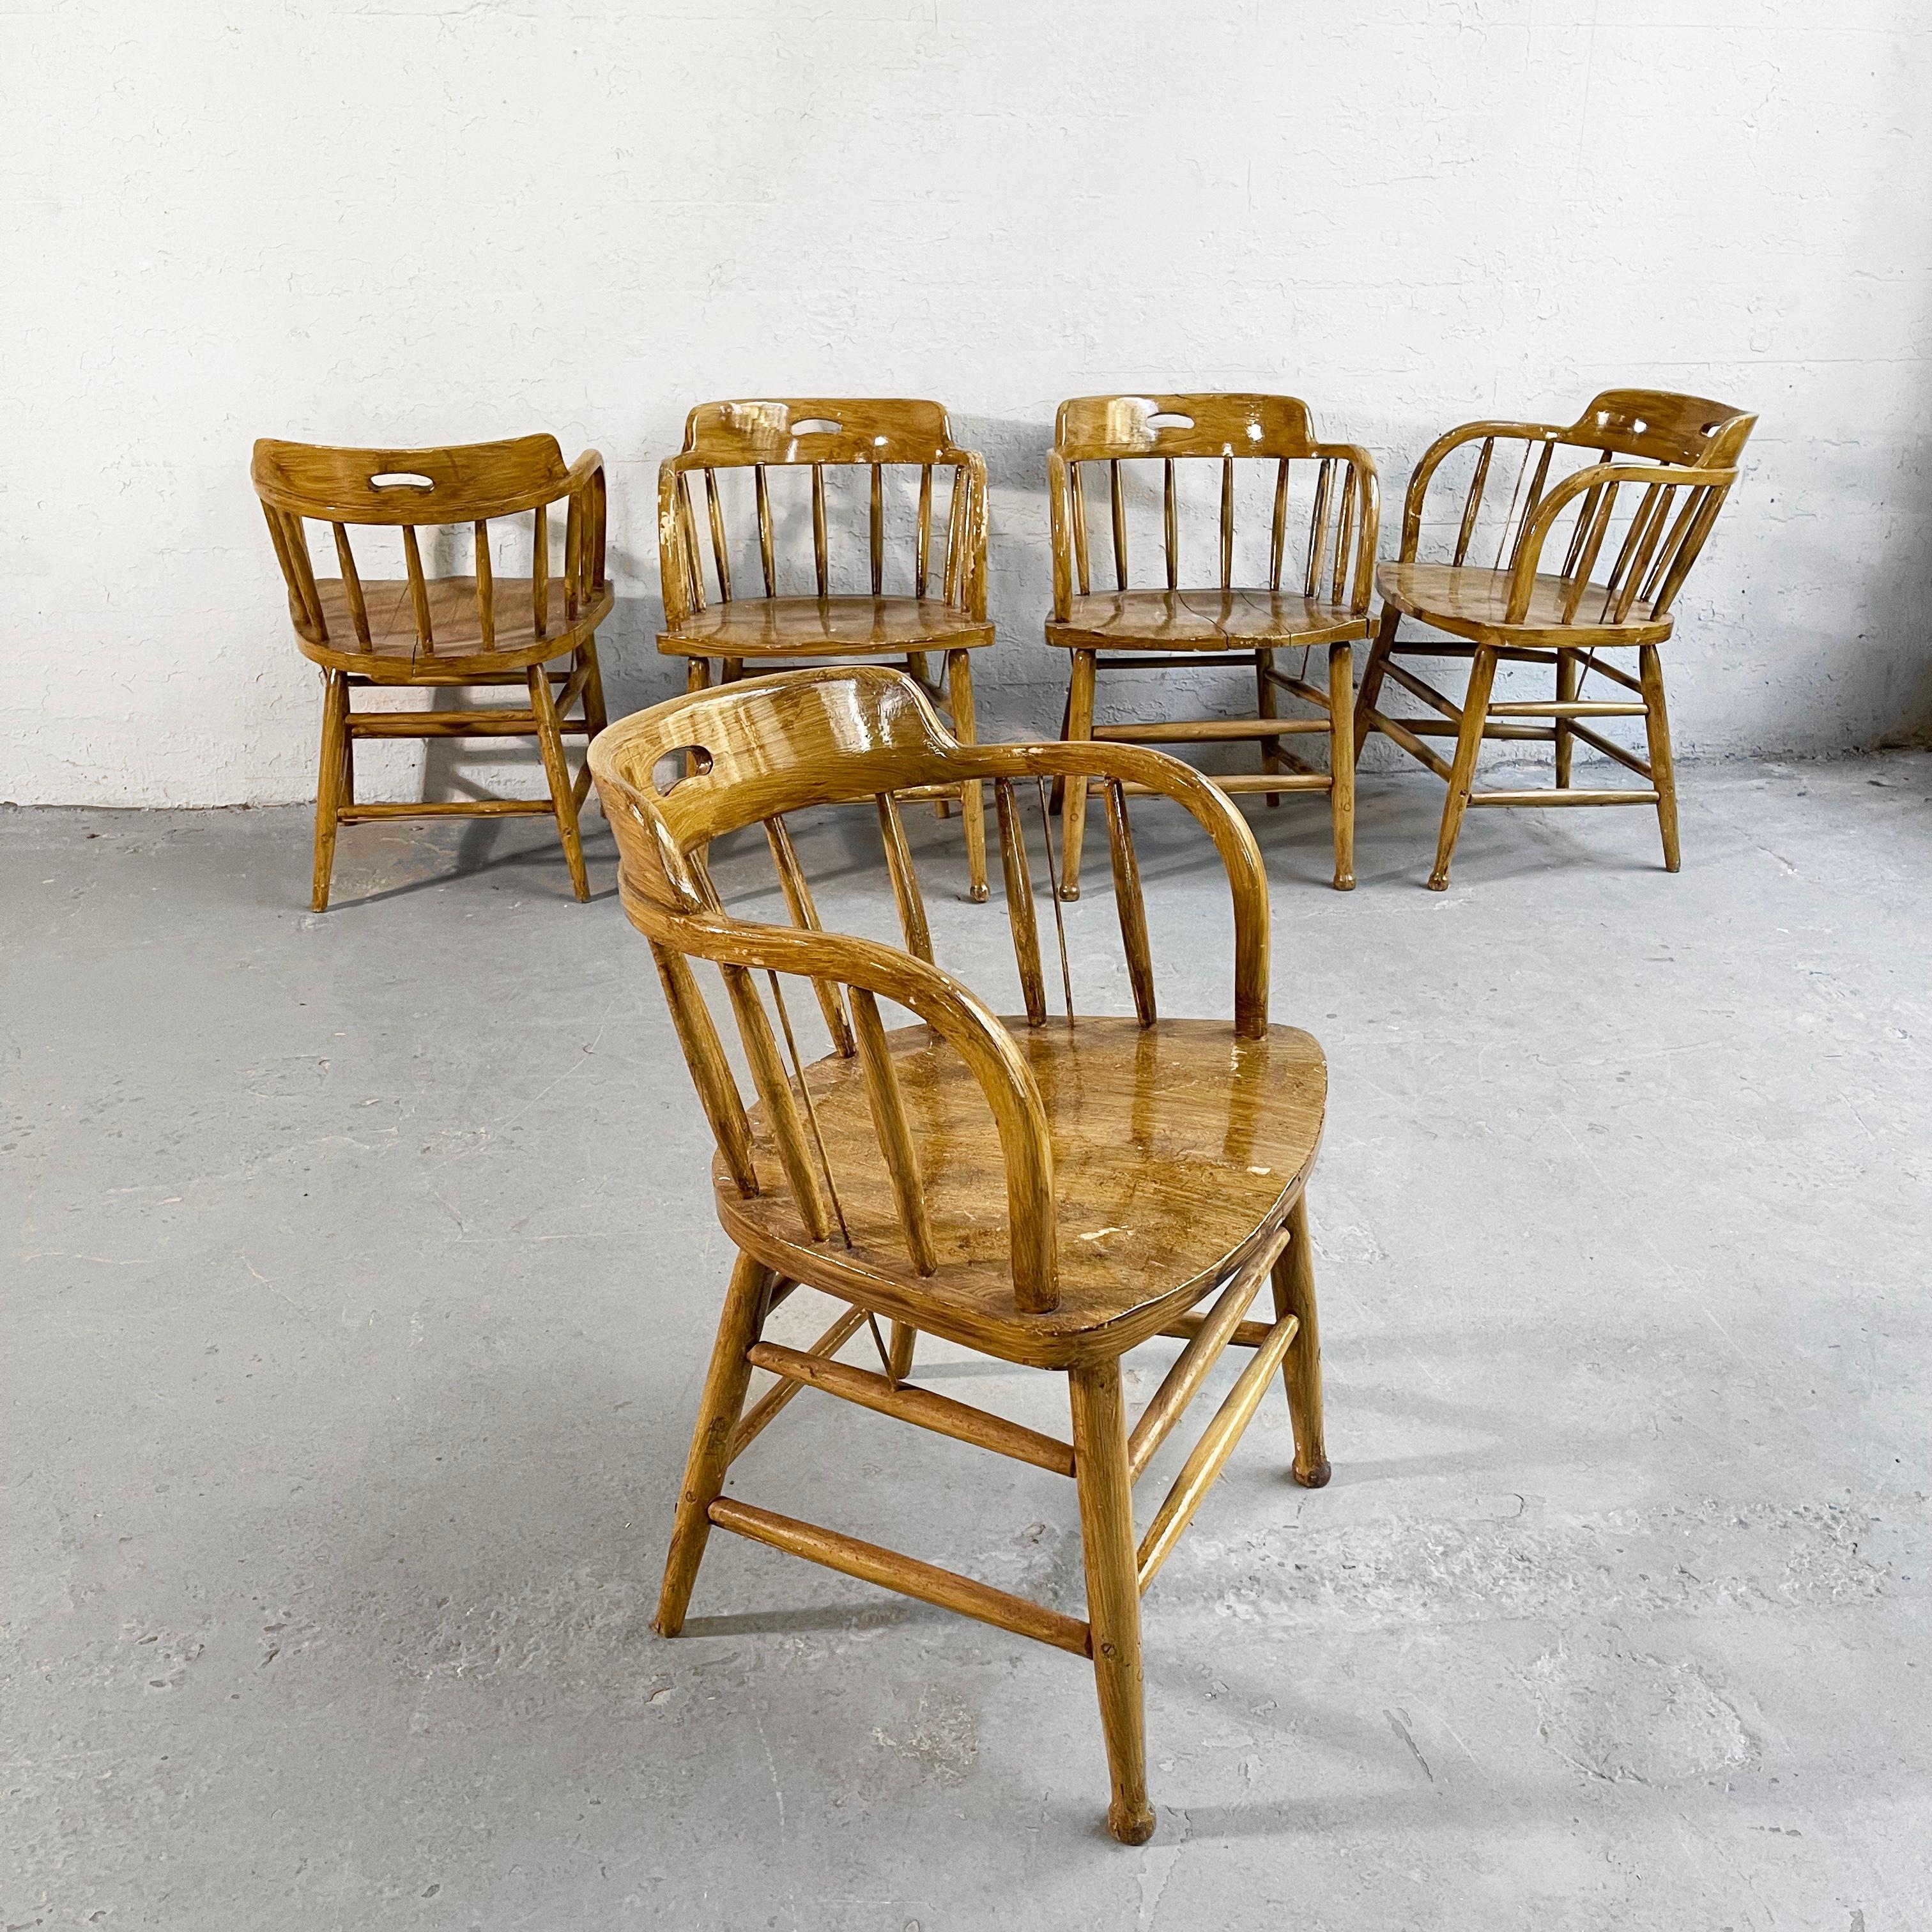 American Early 20th Century, Rustic Oak Firehouse Dining Chairs